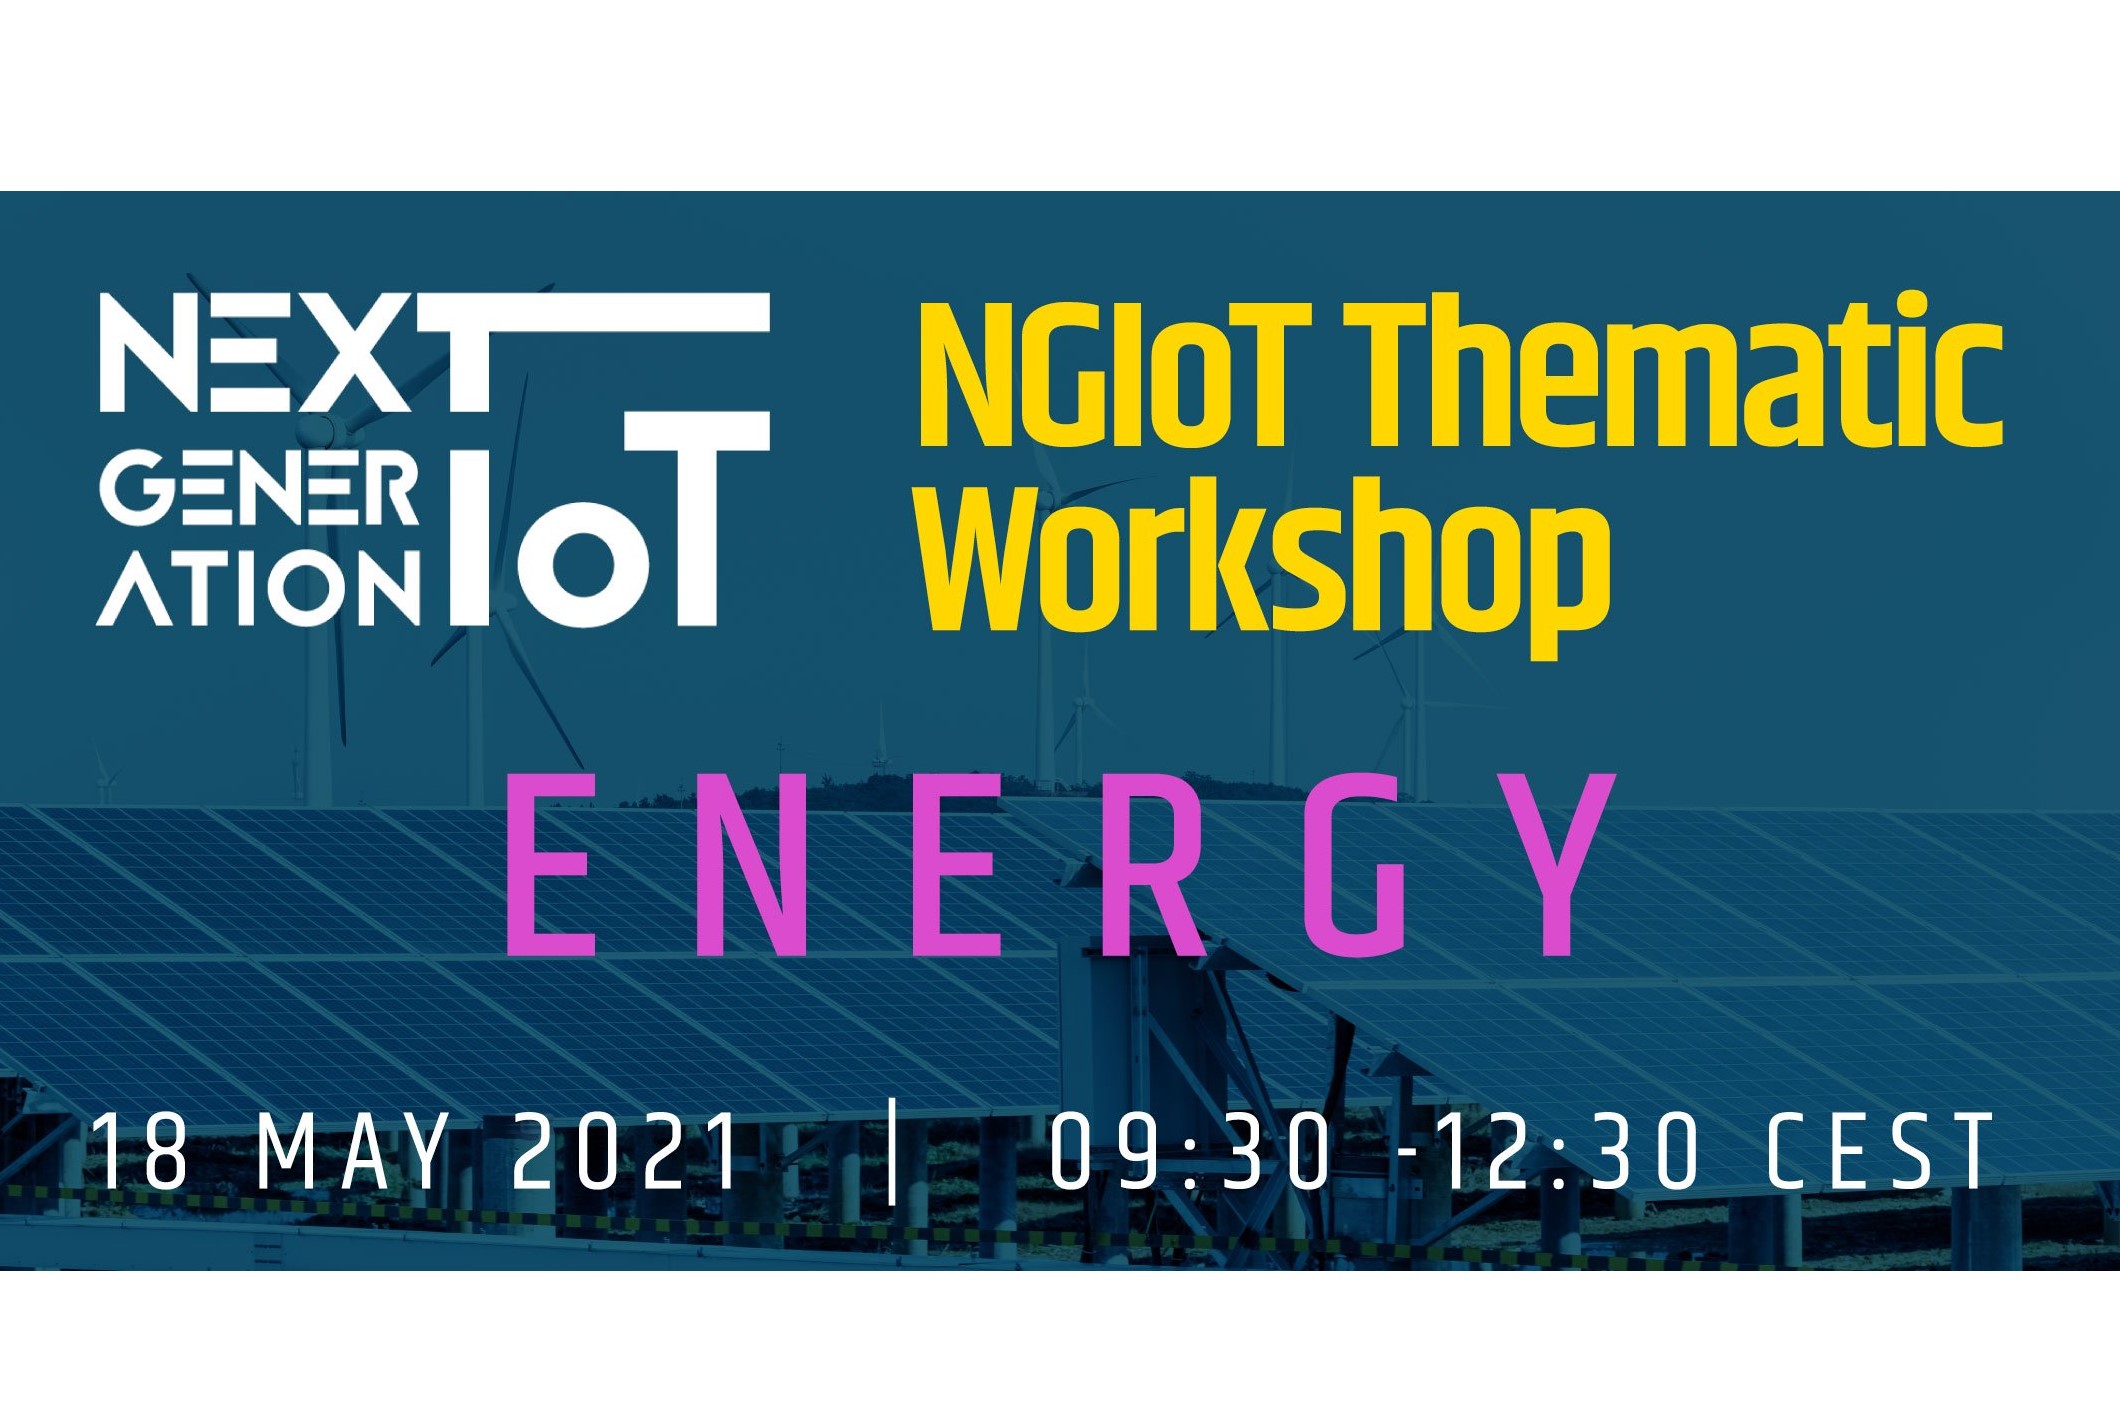 OPEN DEI @ NGIoT Thematic Workshop on Energy